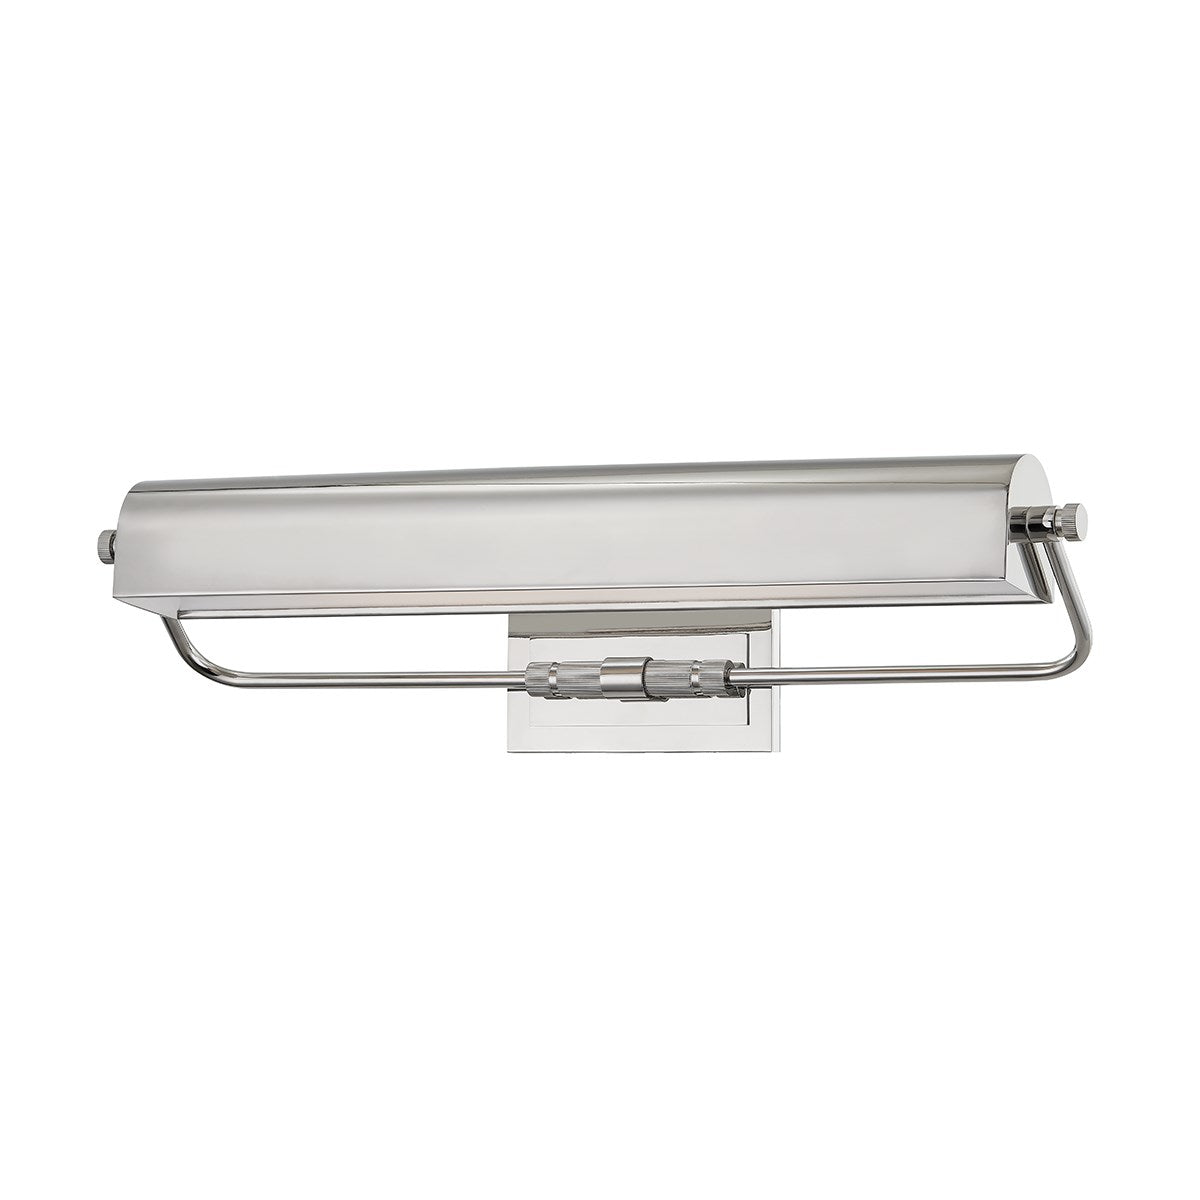 BOWERY - 2 LIGHT LARGE PICTURE LIGHT Wall Light Fixtures Hudson Valley Lighting Polished Nickel  